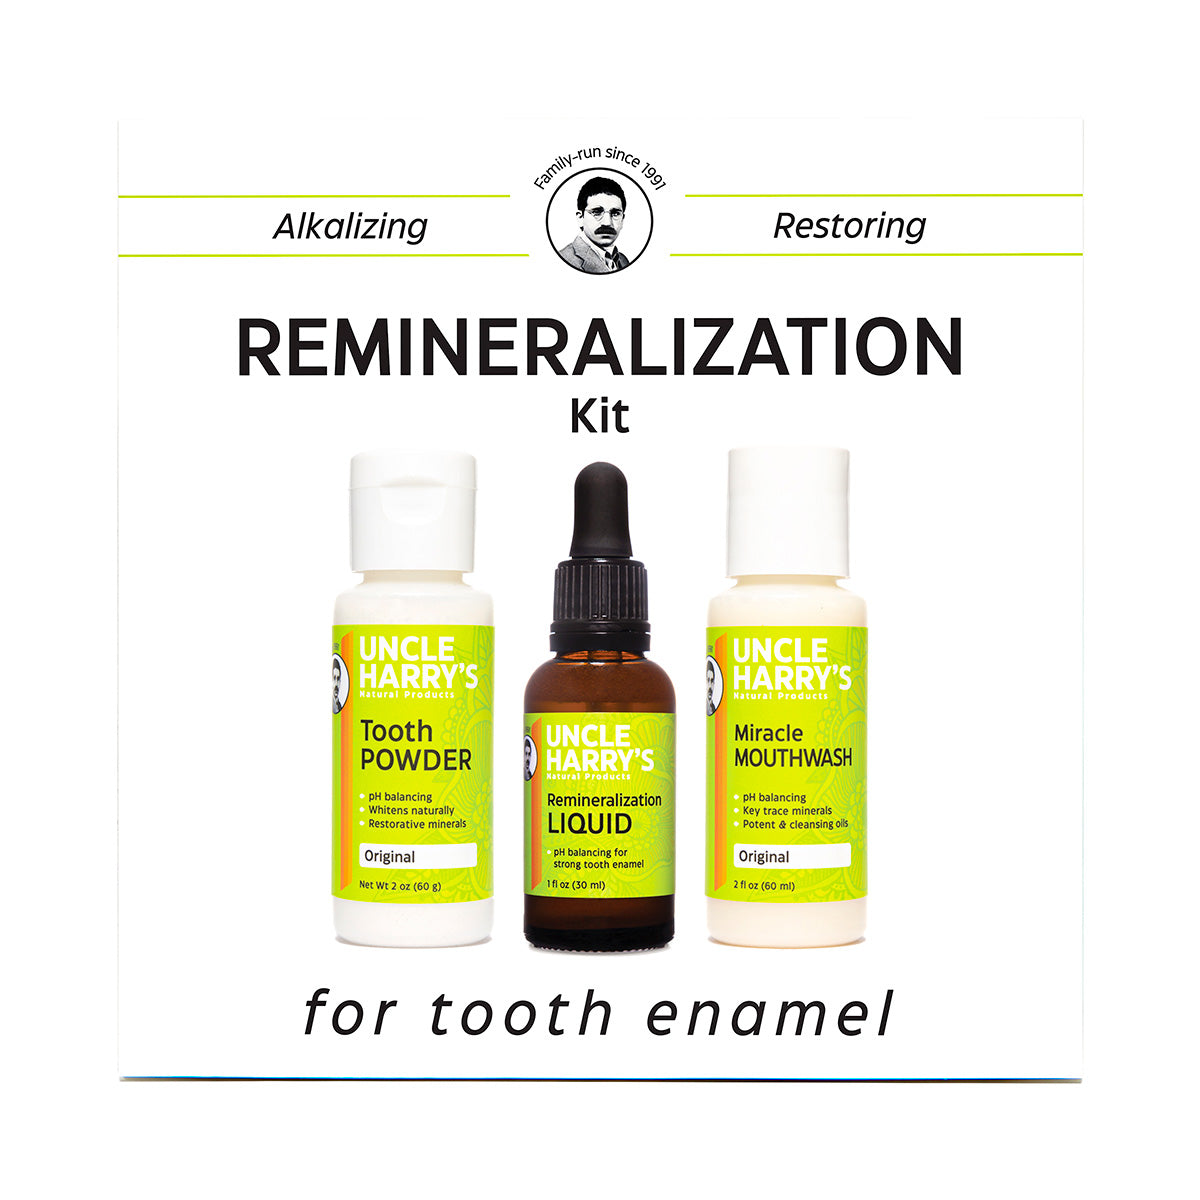 Remineralization Kit for Tooth Enamel